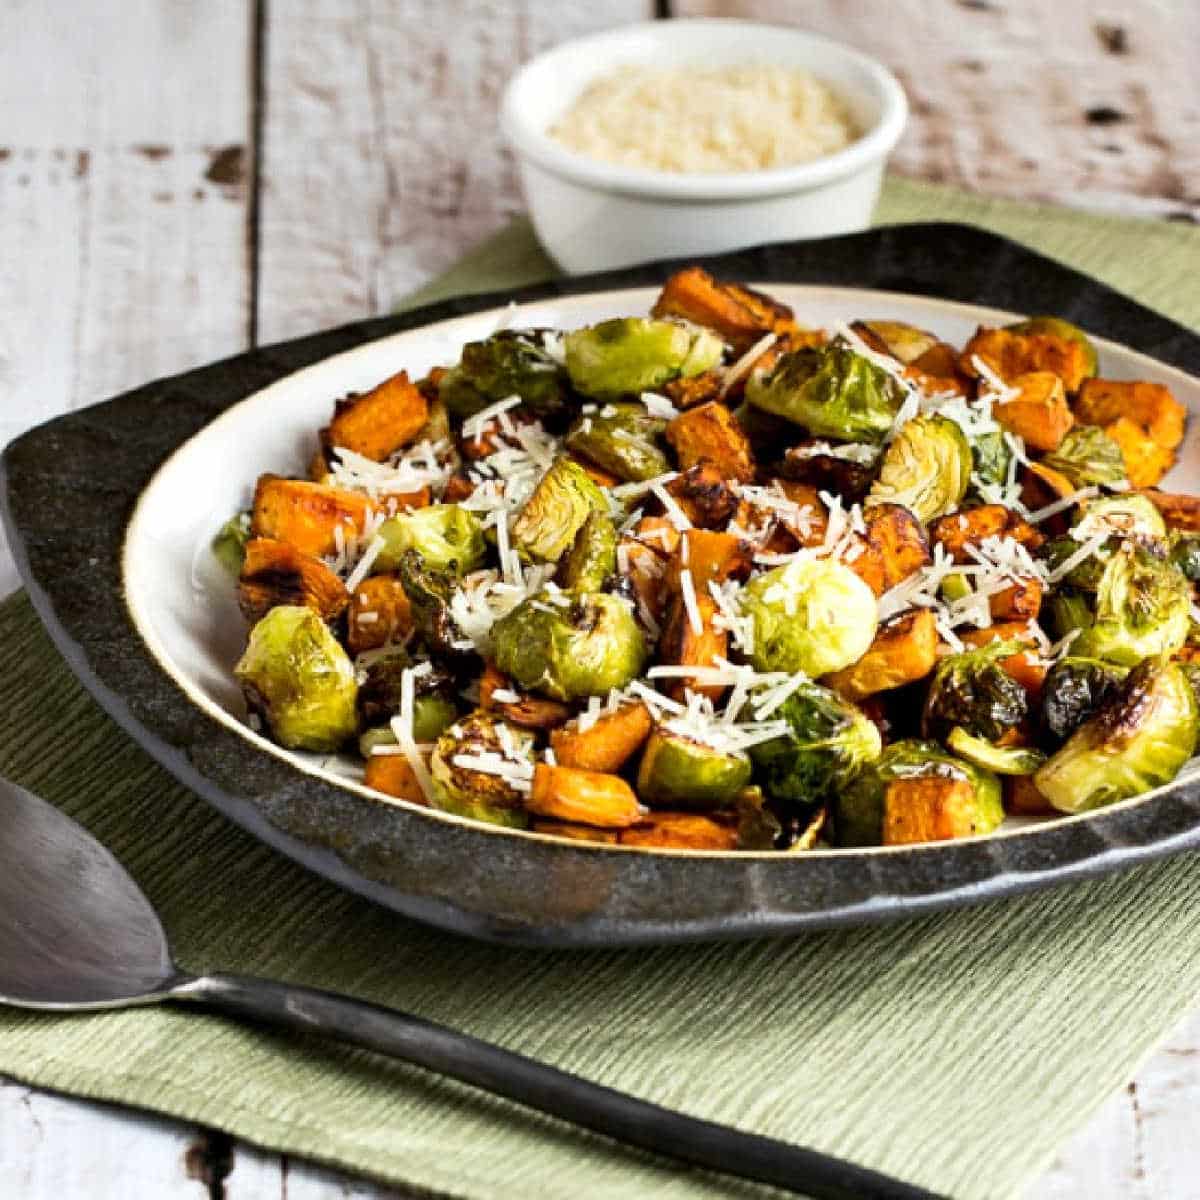 Square image of sweet potatoes and brussels sprouts on a serving plate